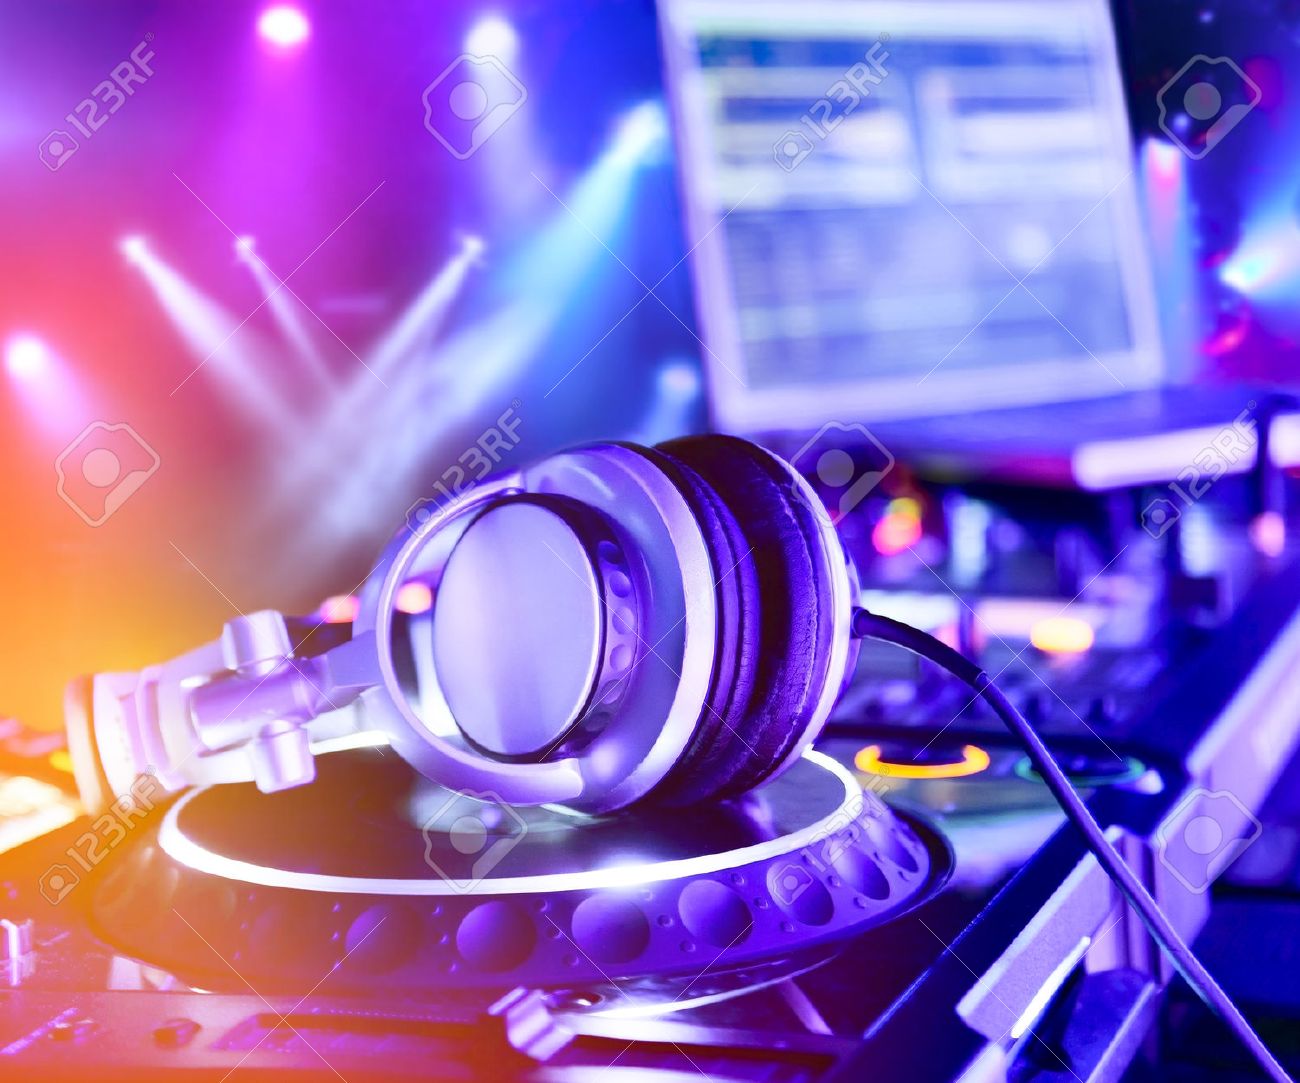 Dj Mixer With Headphones At Nightclub In The Background Laser